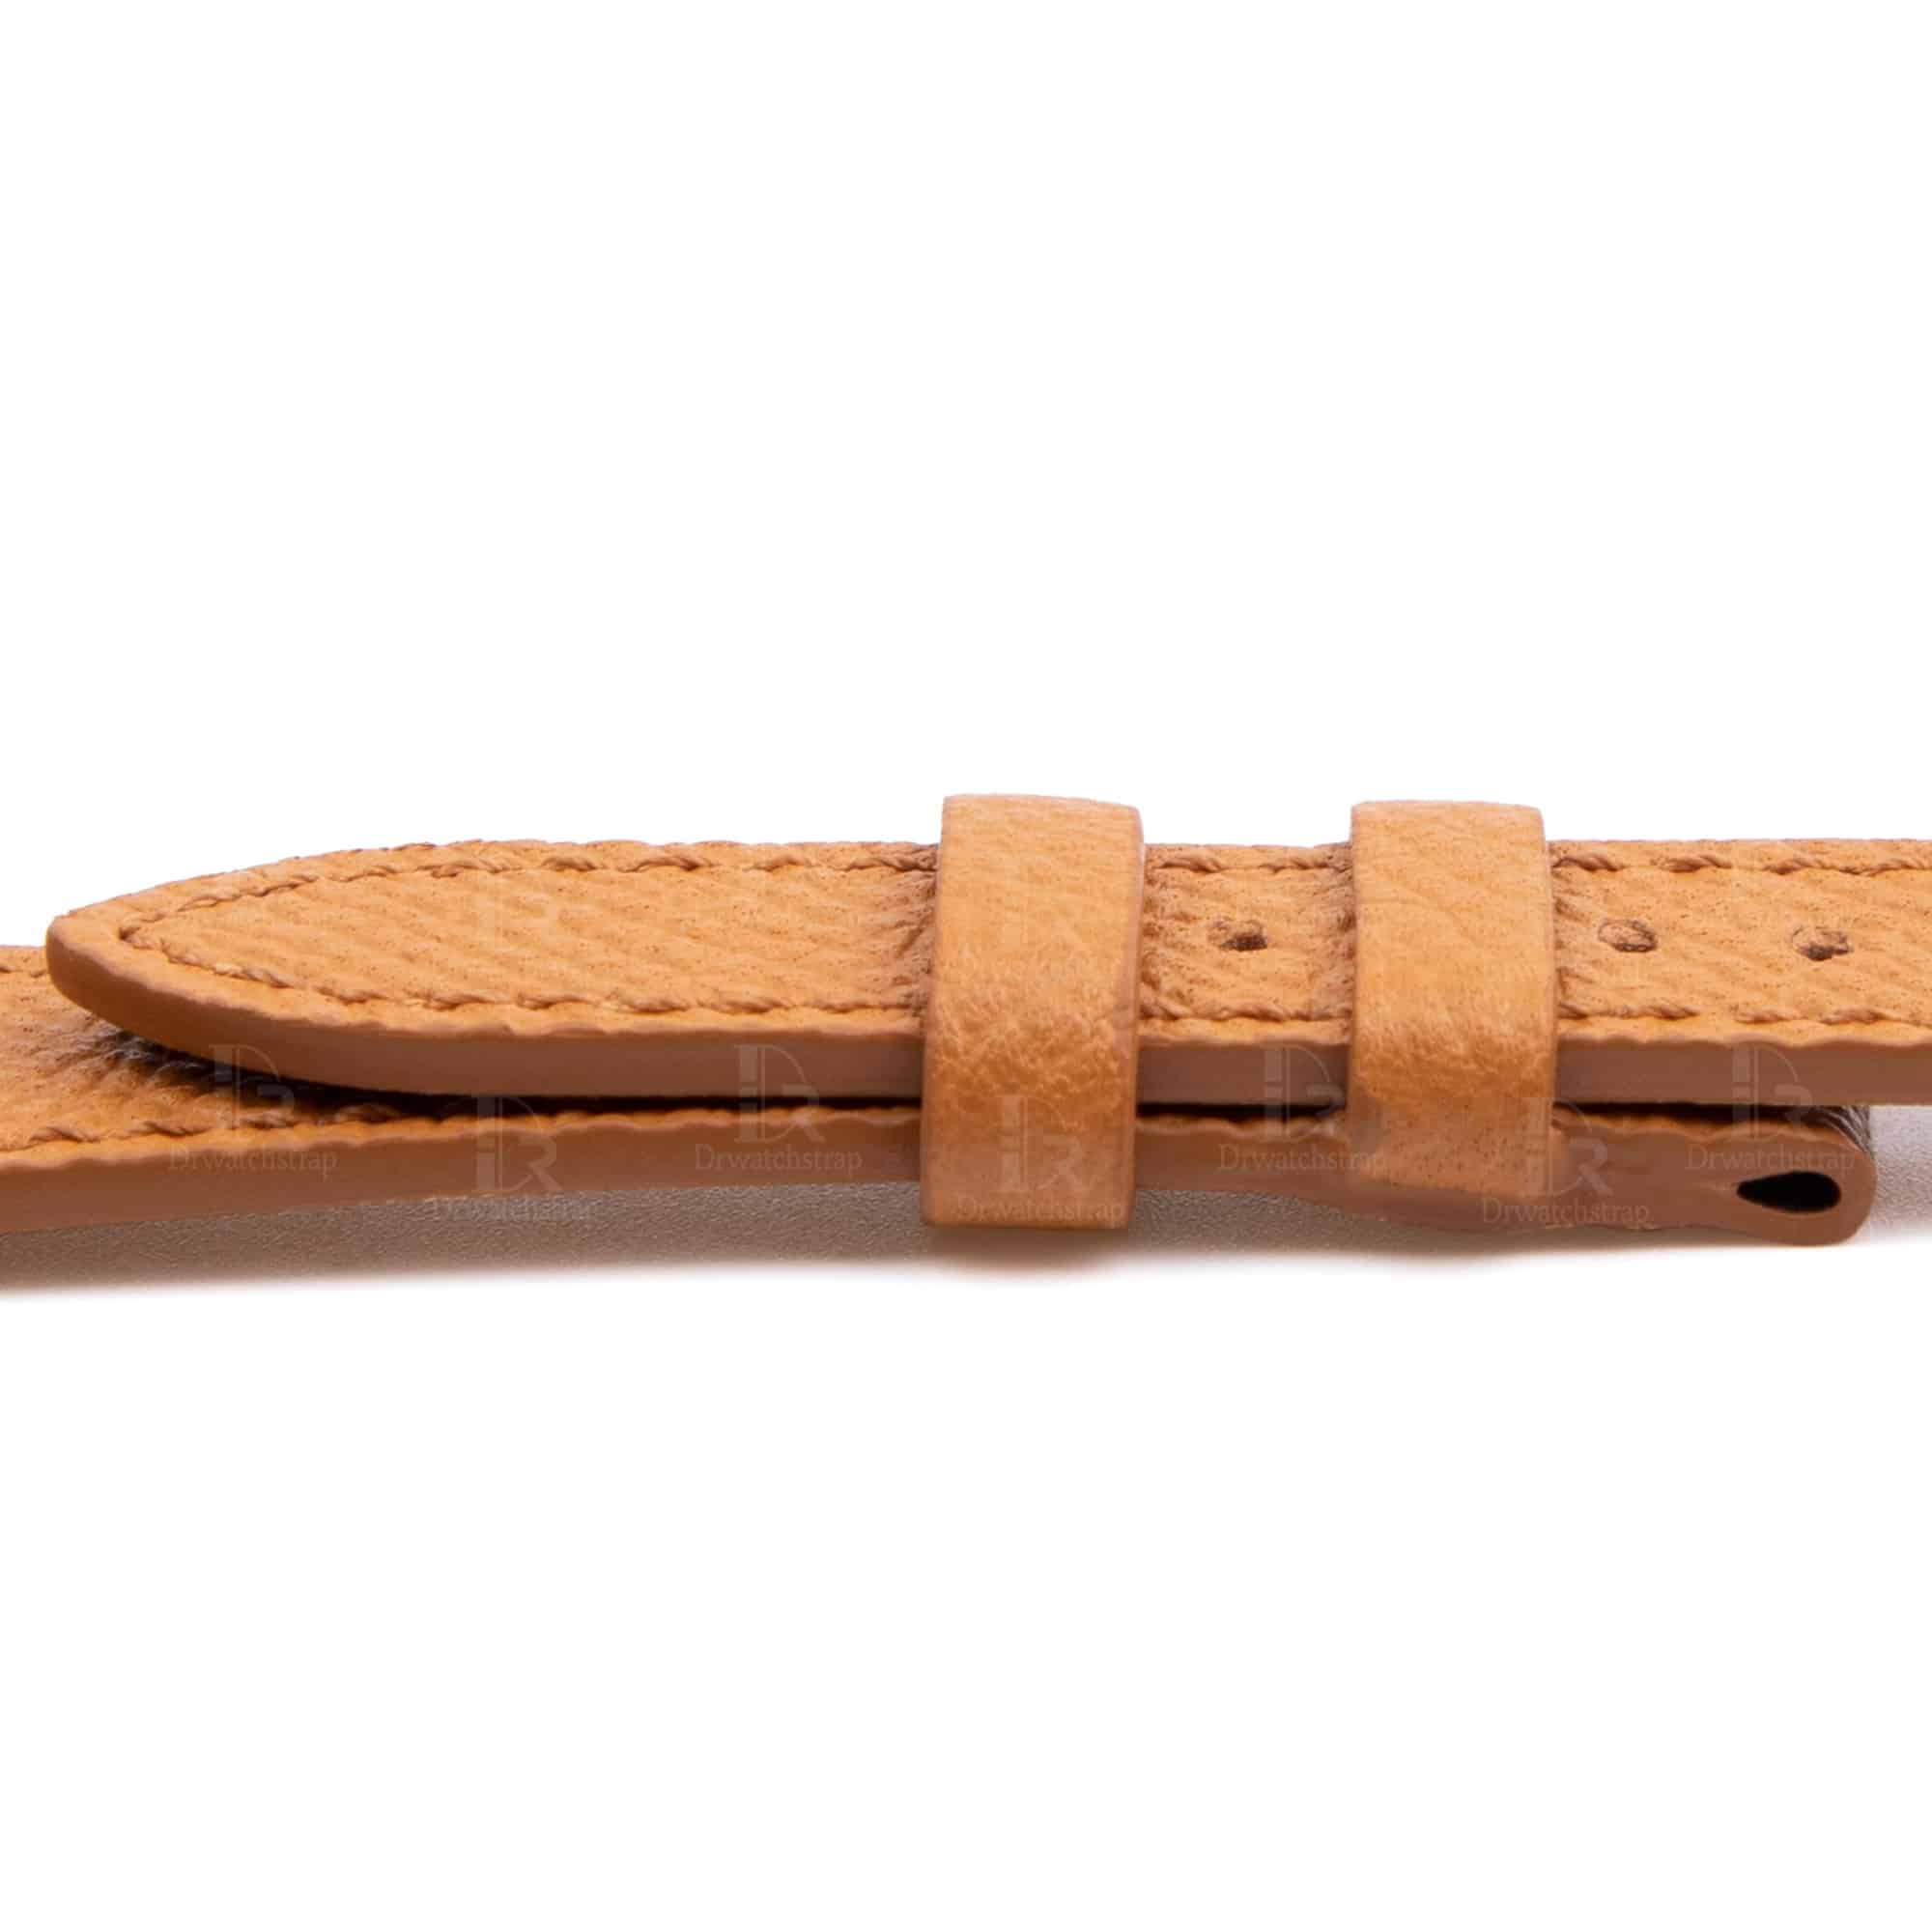 Hermes double tour watch band orange Leather for sale- Handcrafted